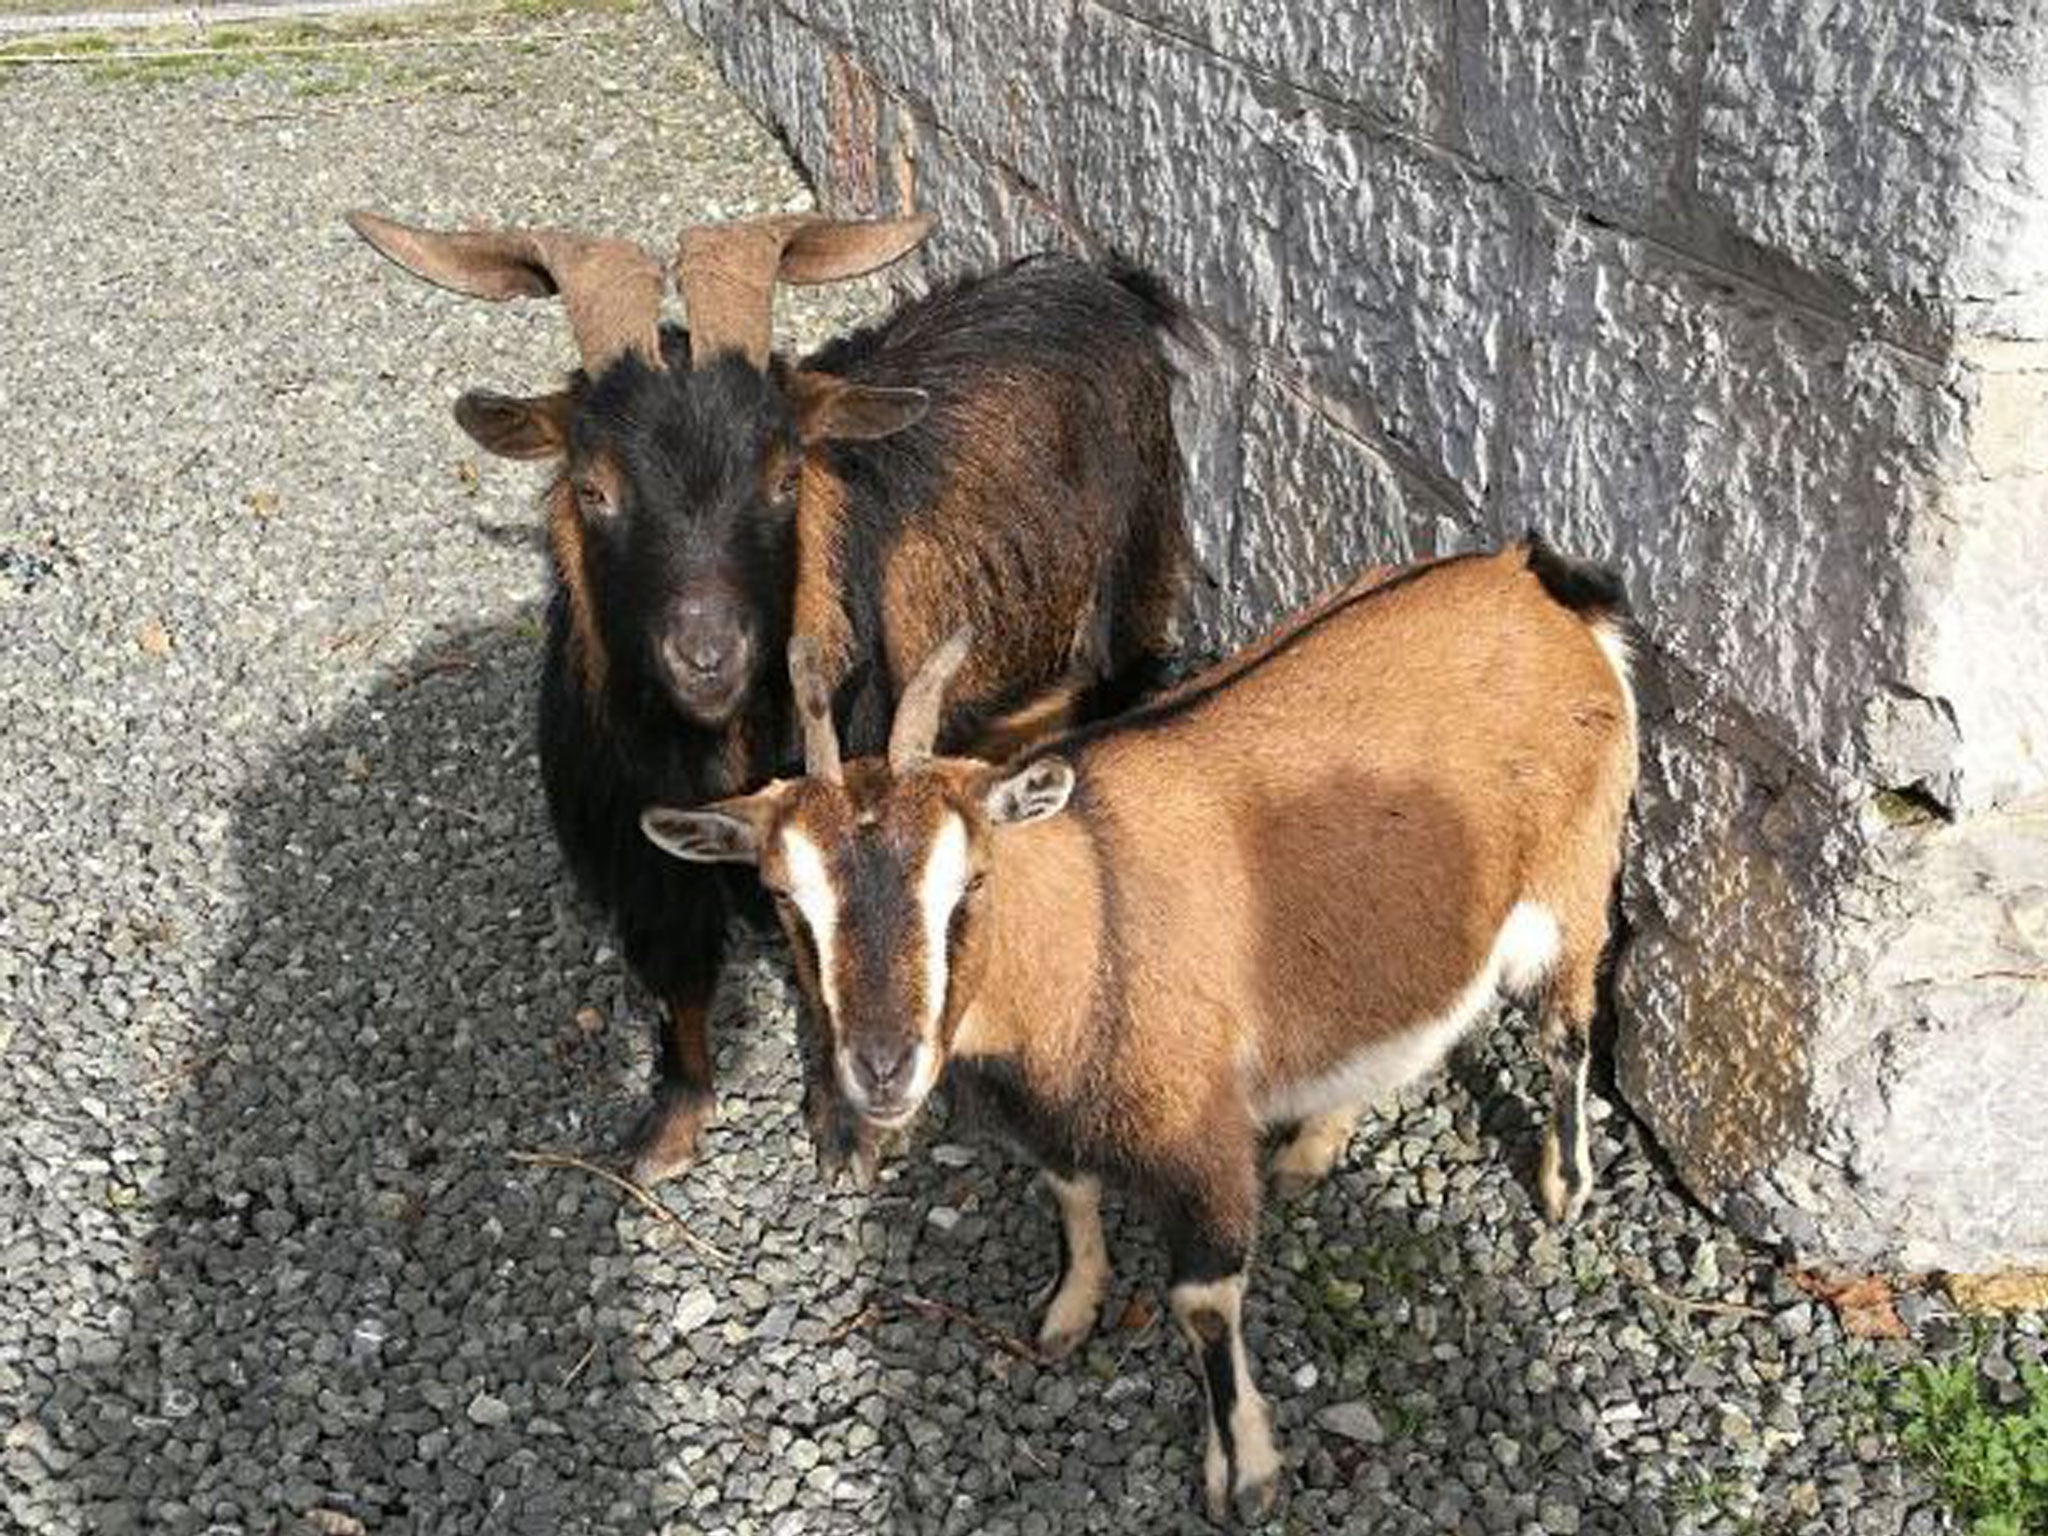 The goats have lived wild on the island of Palmaria off the coast of Liguria in northern Italy since the 1960s